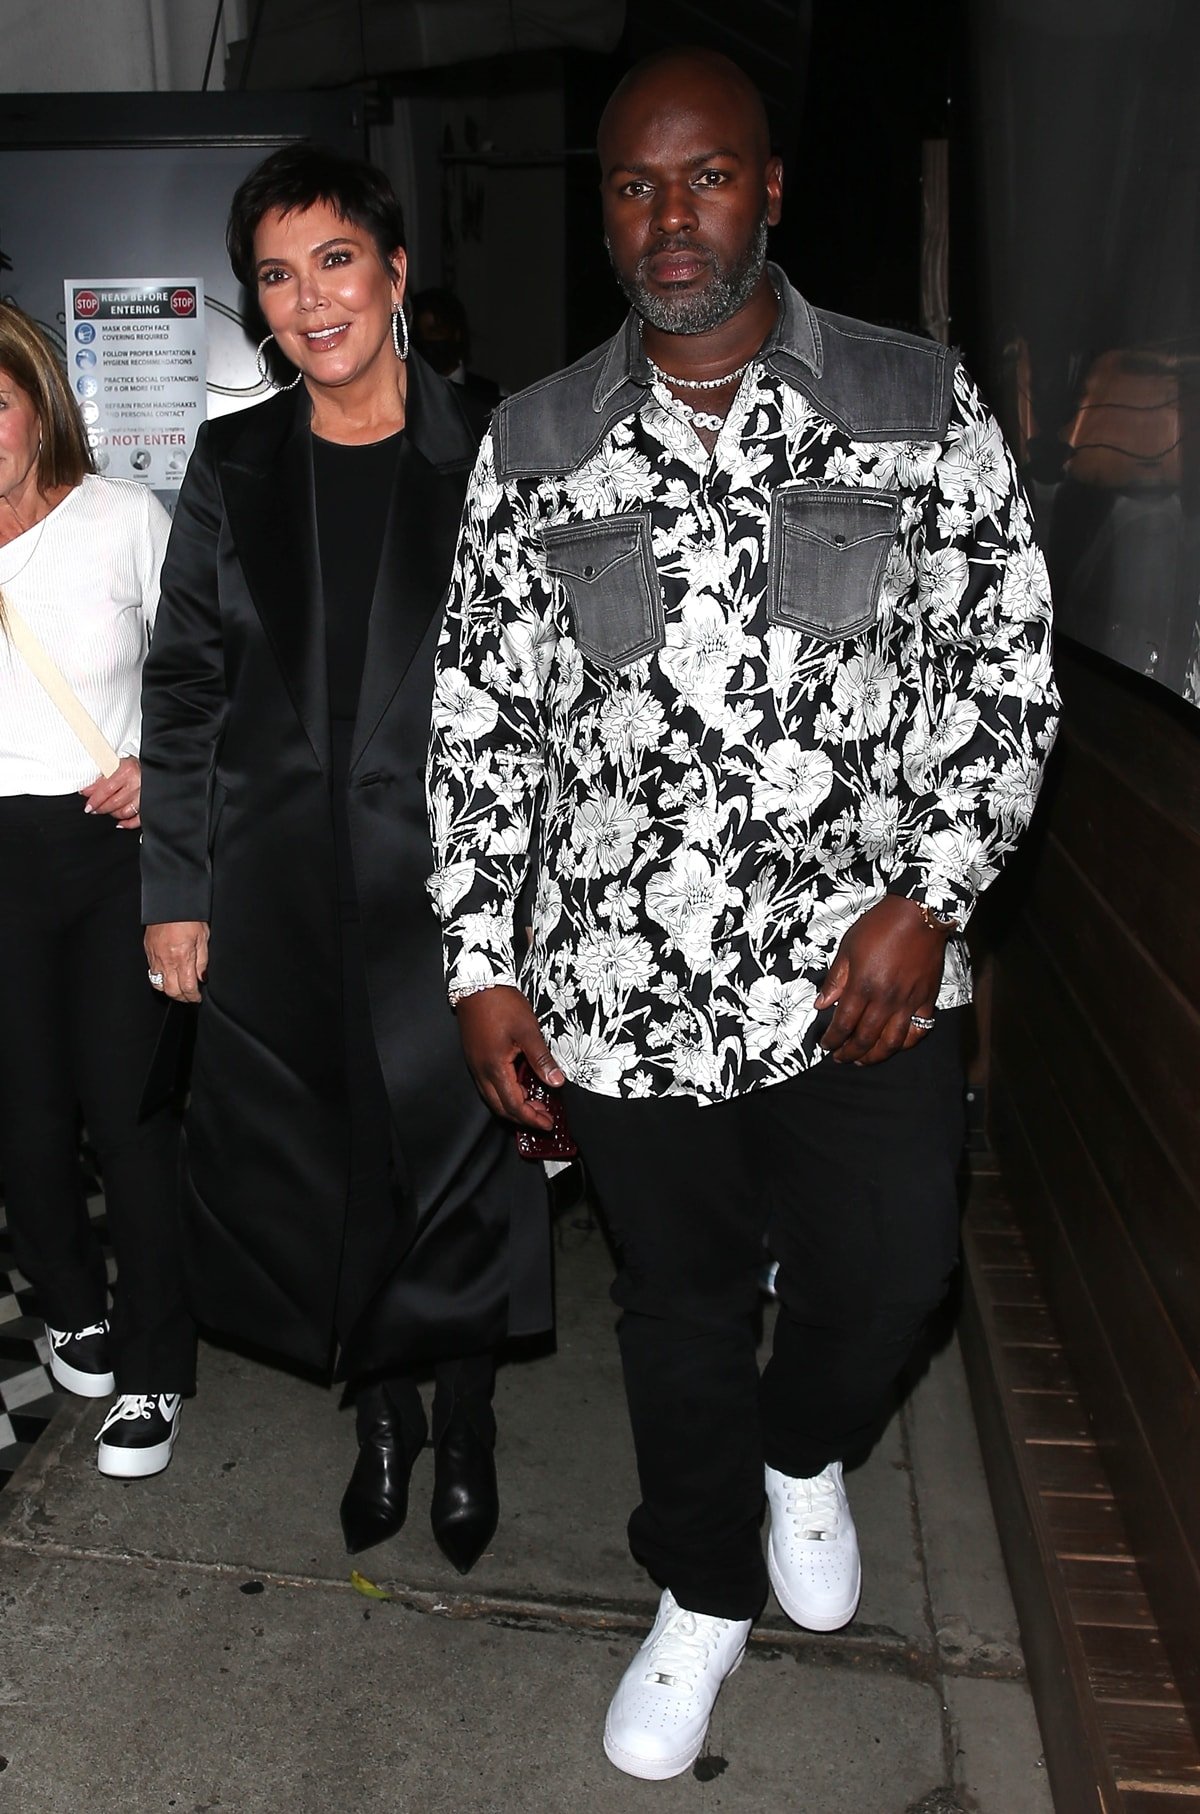 Kris Jenner and her boyfriend Corey Gamble leaving dinner at Craigs Restaurant in West Hollywood